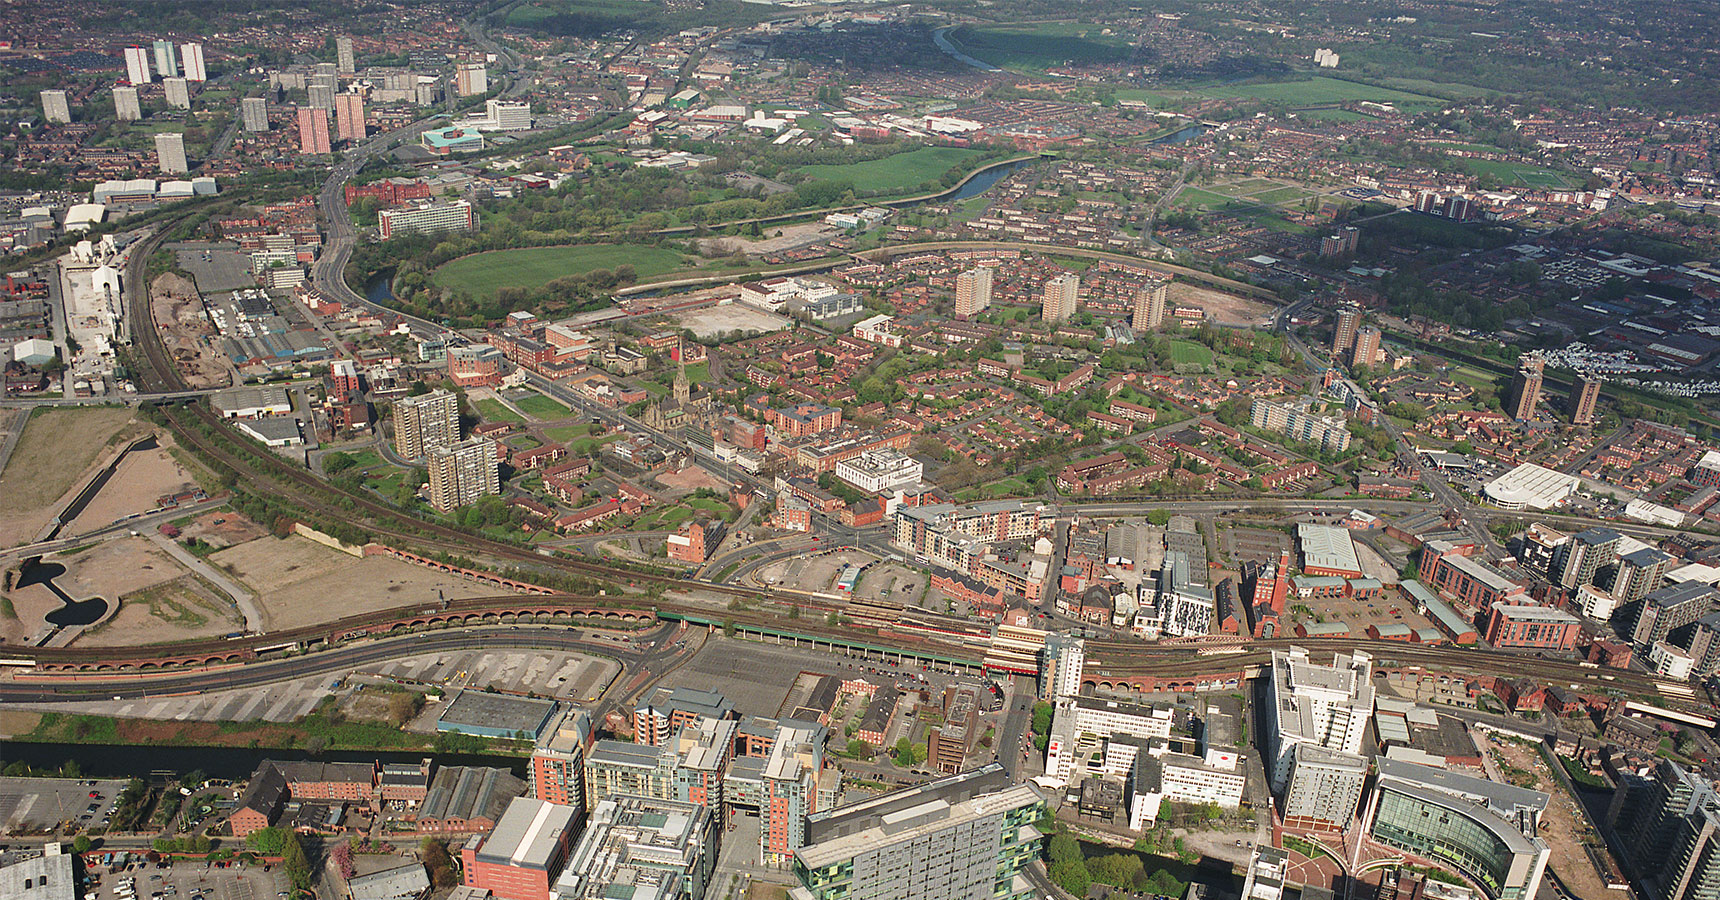 //uistudio.co.uk/wp-content/uploads/2018/01/2392_Salford-Central_Aerial-view_1720x900.jpg